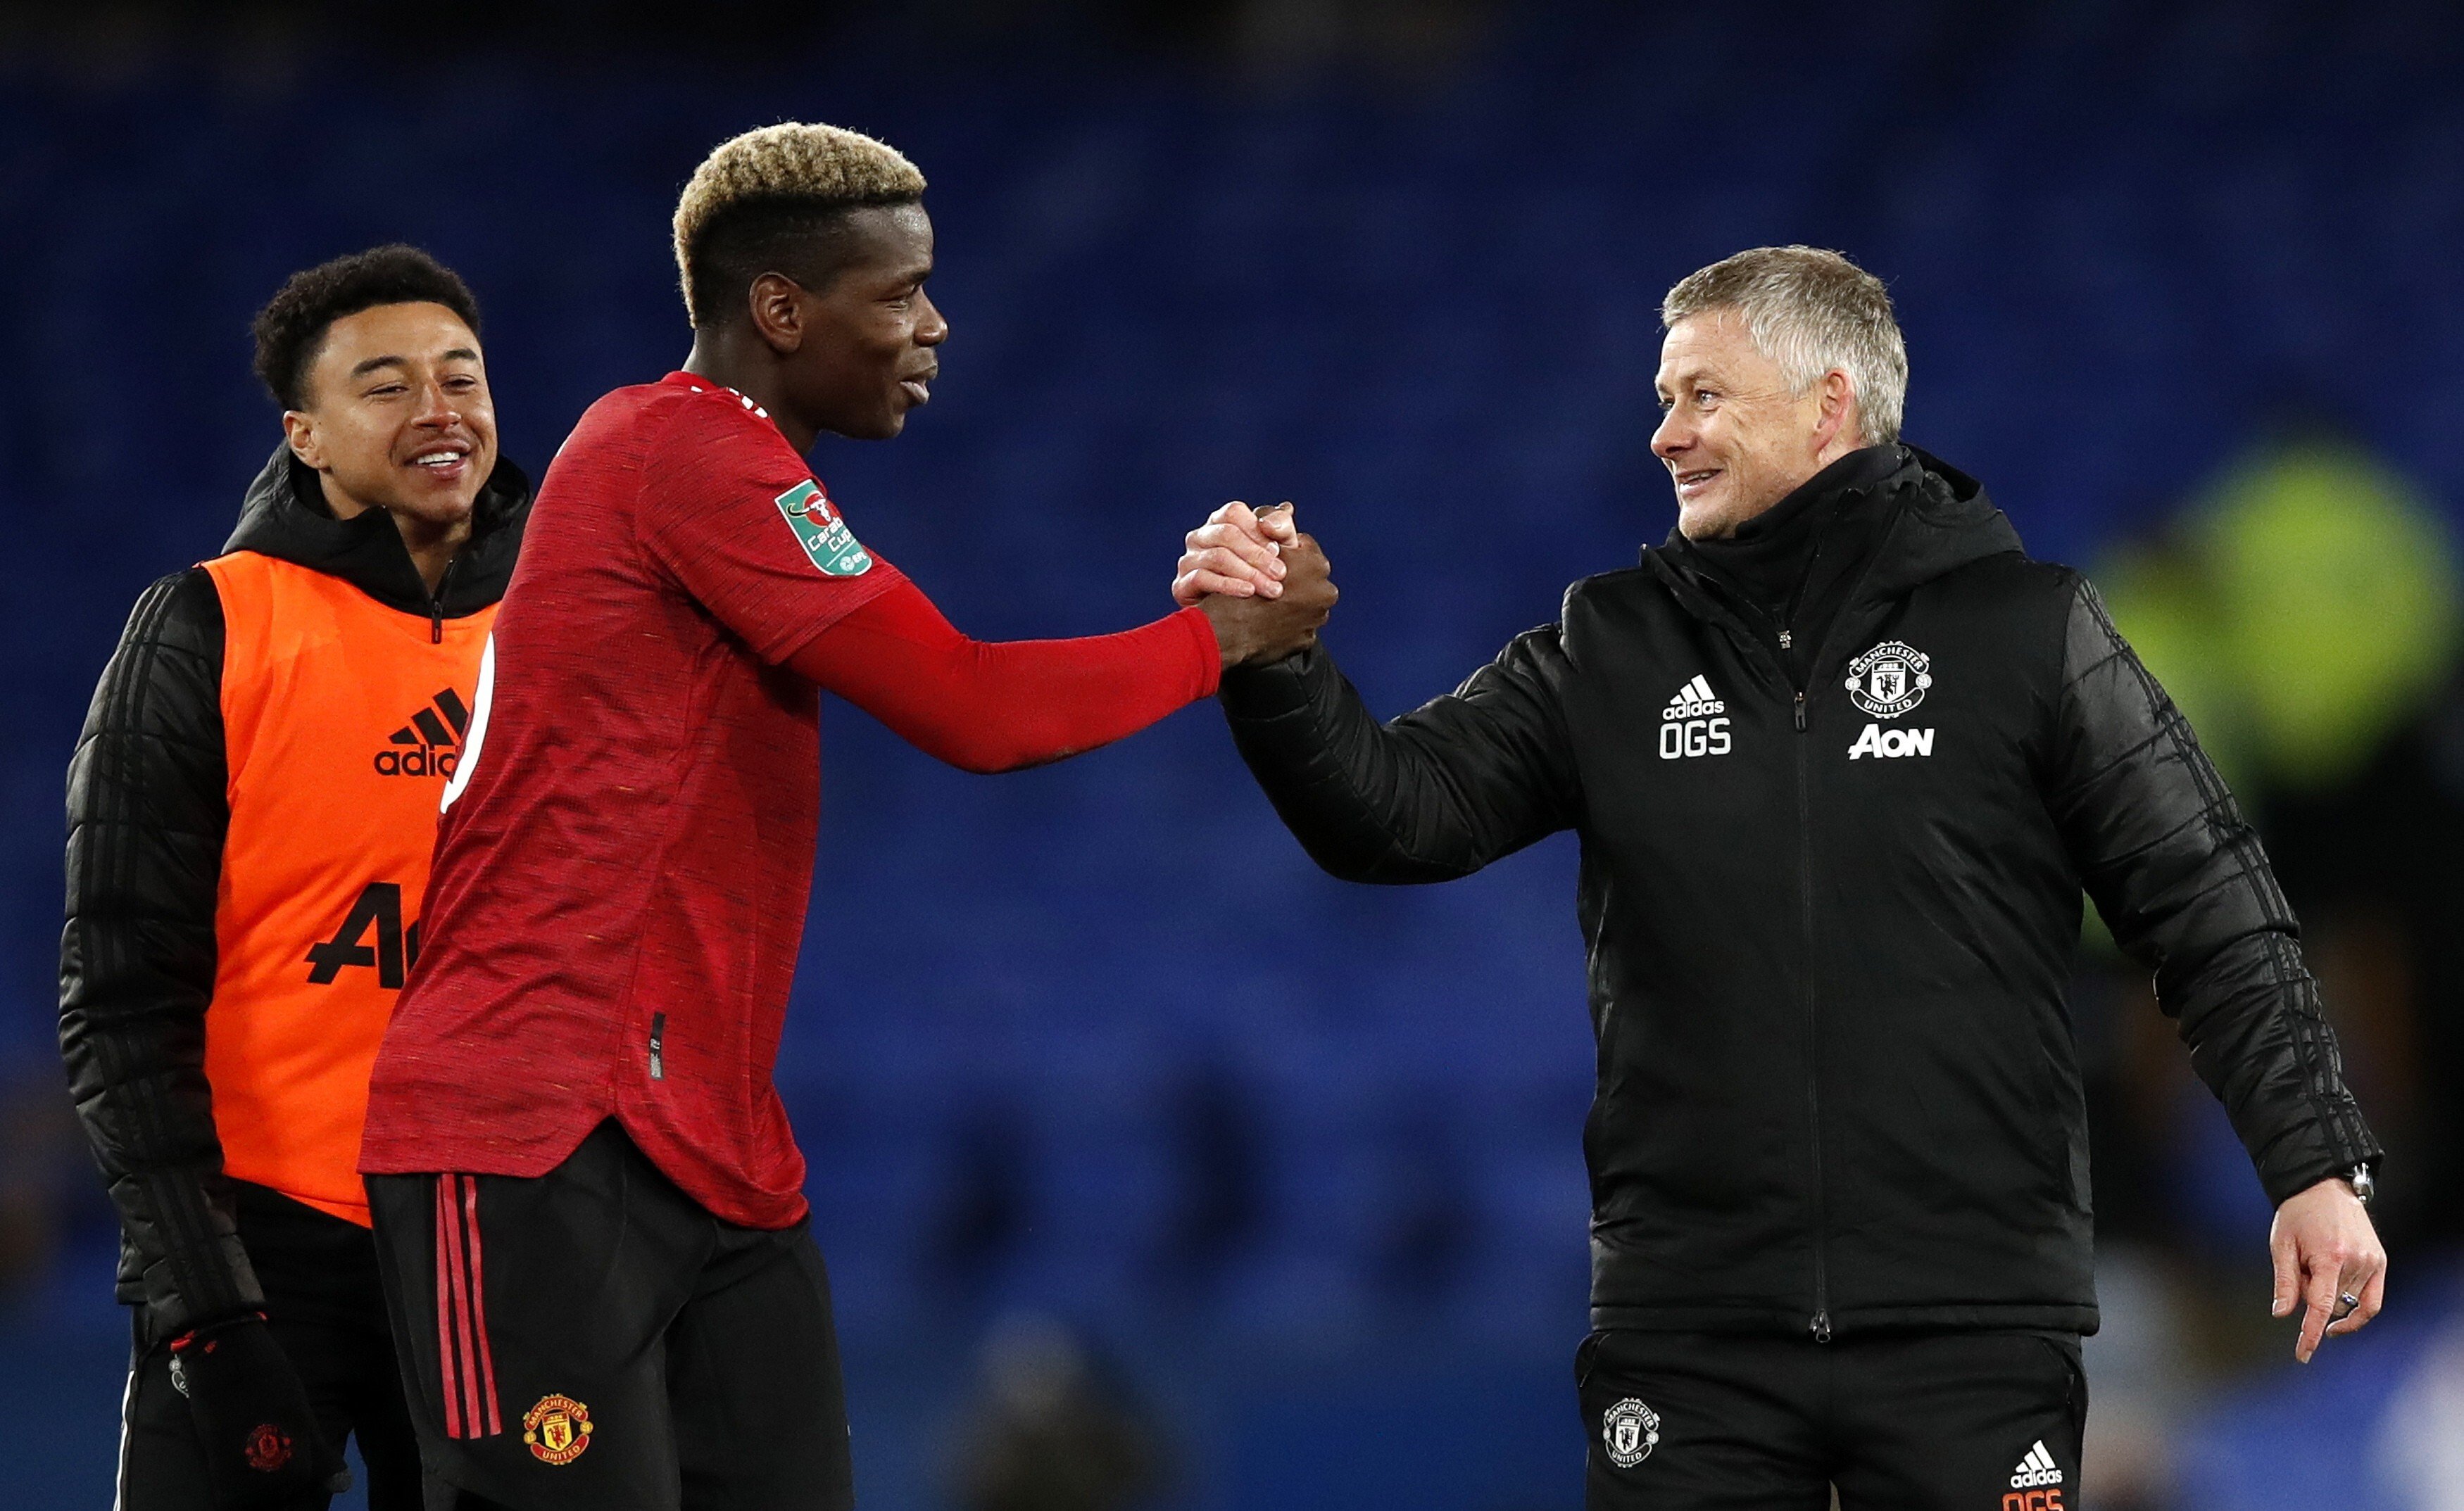 Manchester United manager Ole Gunnar Solskaer clasps hands with Paul Pogba after the Carabao Cup quarter-final victory over Everton on December 23. Photo: EPA